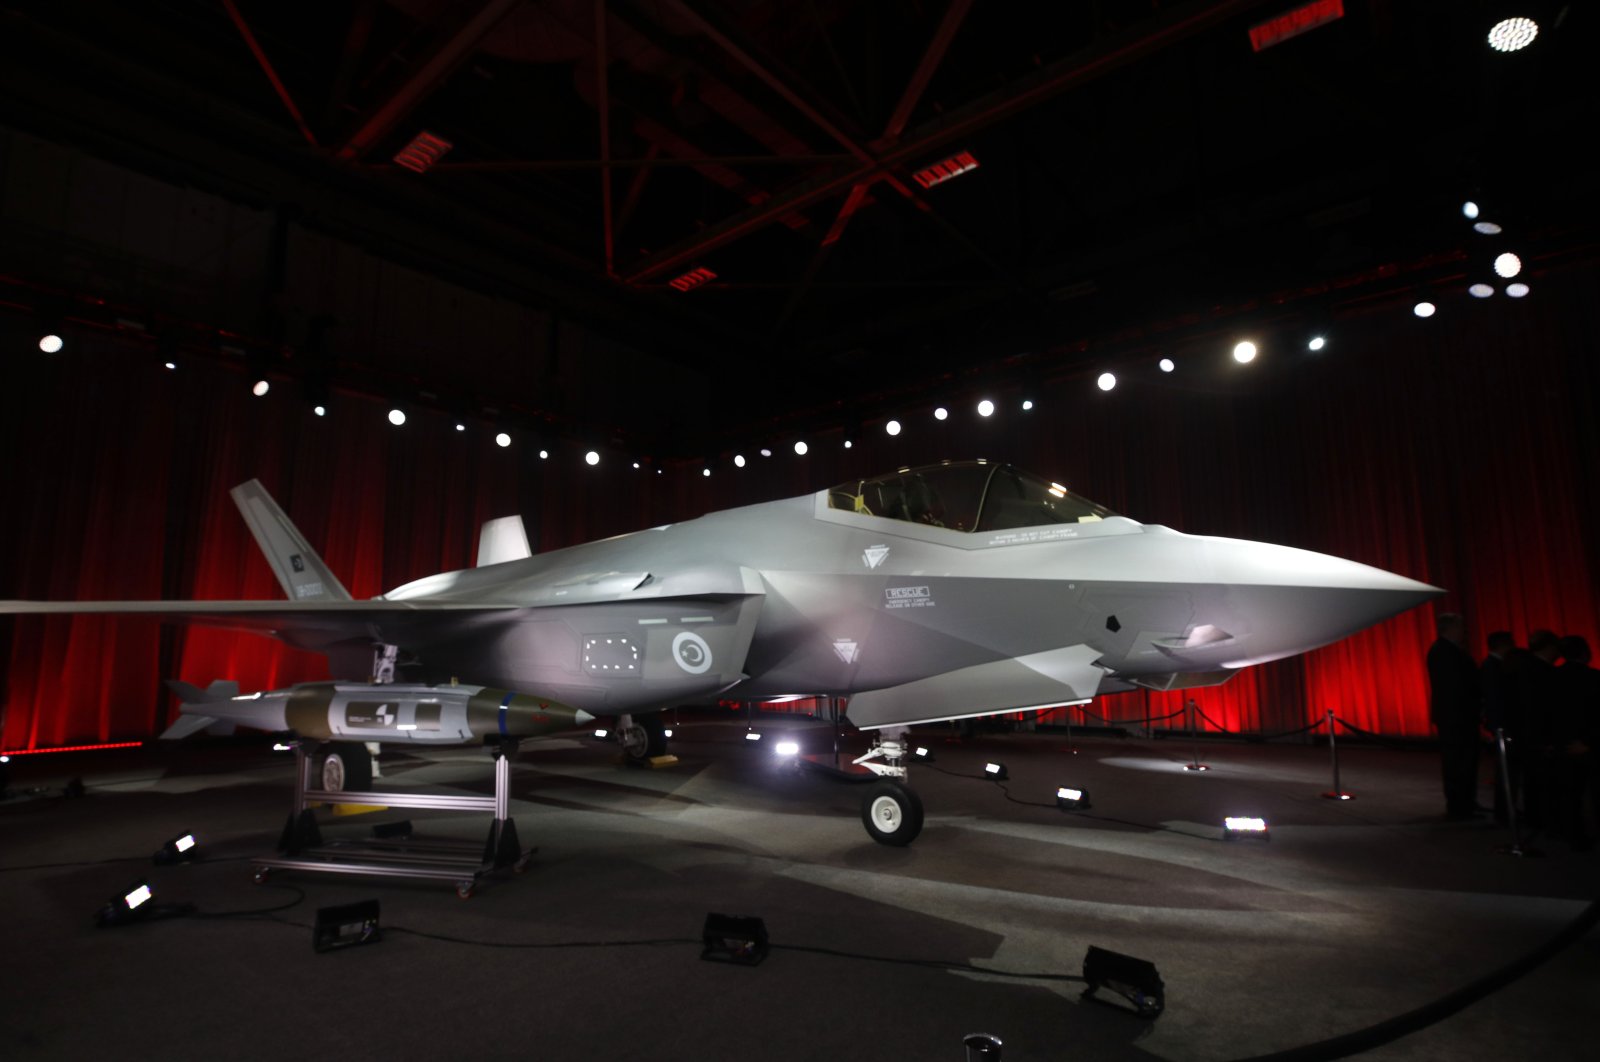 An F-35 fighter jet is seen as Turkey takes delivery of its first F-35 fighter jet with a ceremony at the Lockheed Martin in Forth Worth, Texas, U.S., June 21, 2018. (AA Photo)